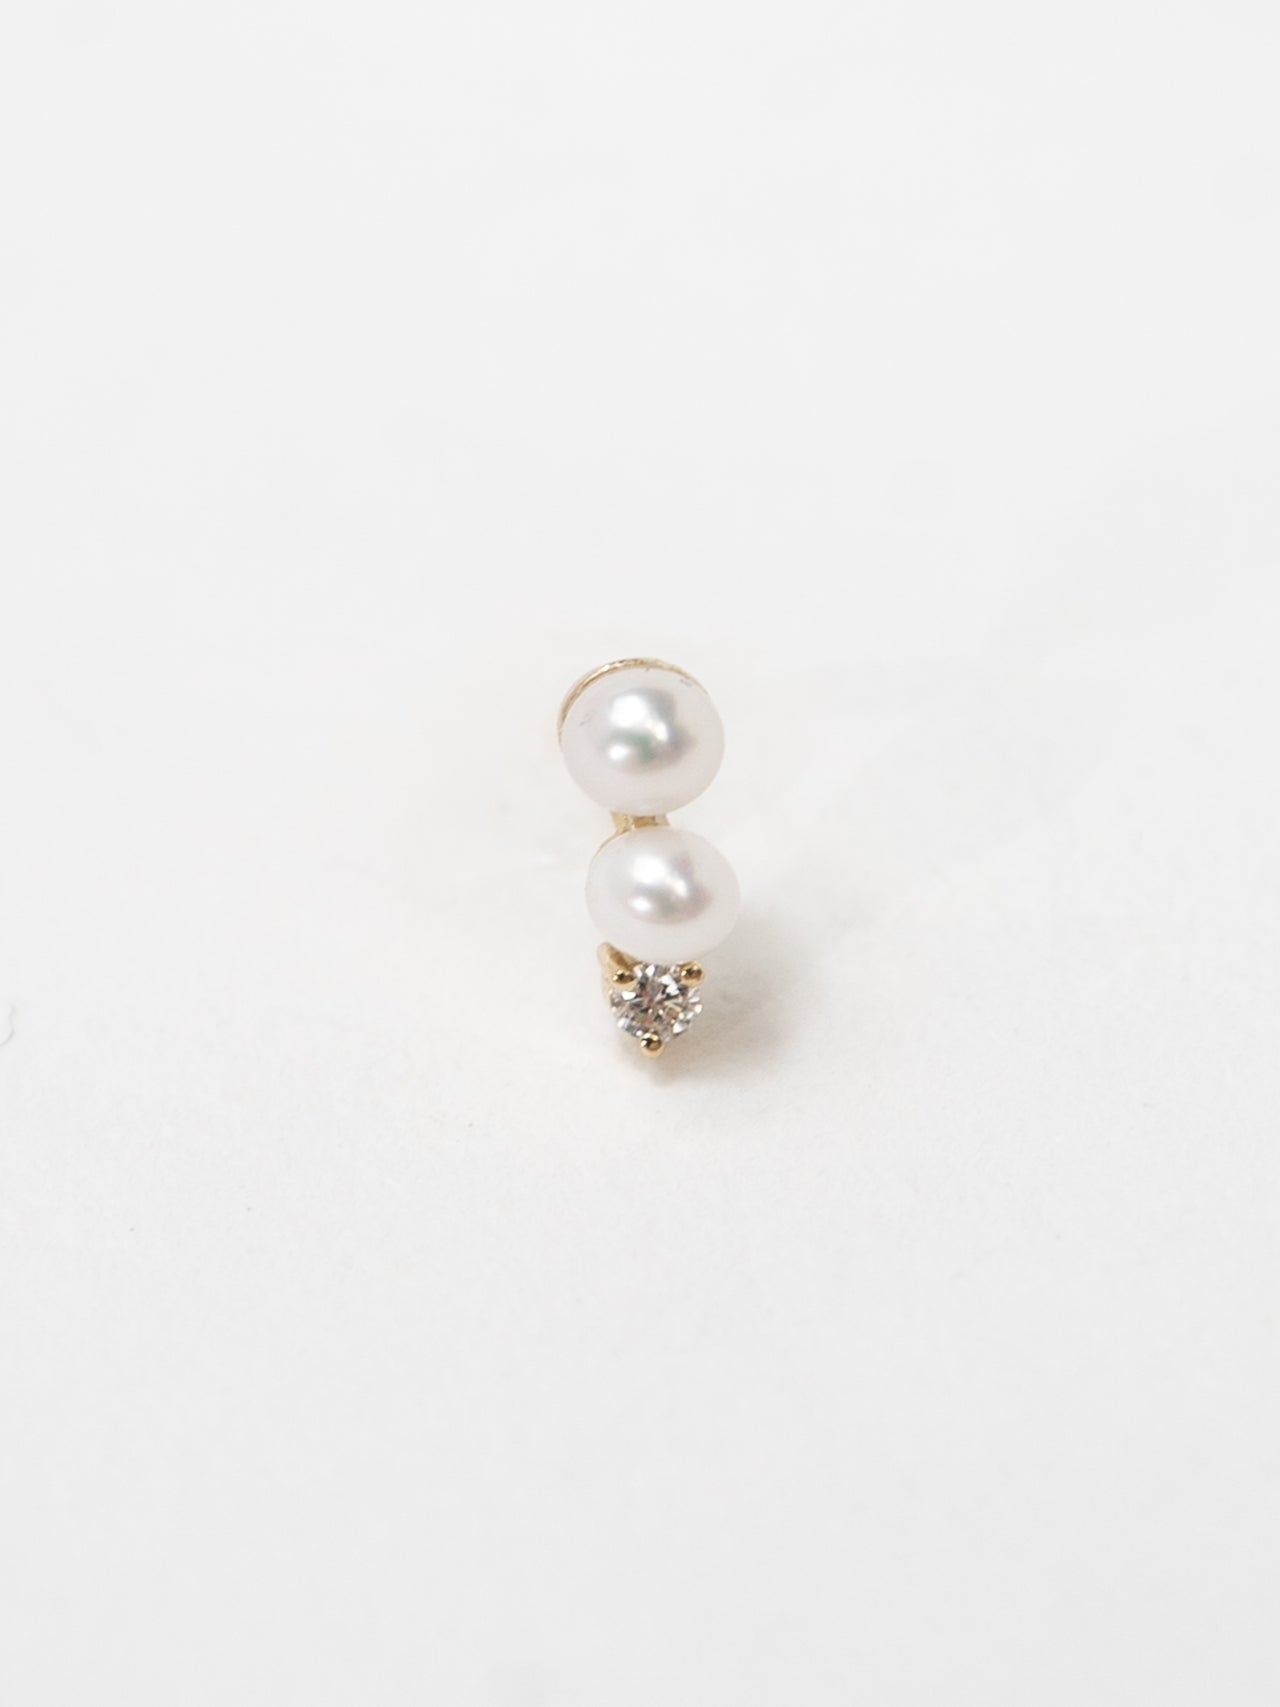 14kt Gold Mini Pearl & Diamond Stud earring pictured on light grey background.